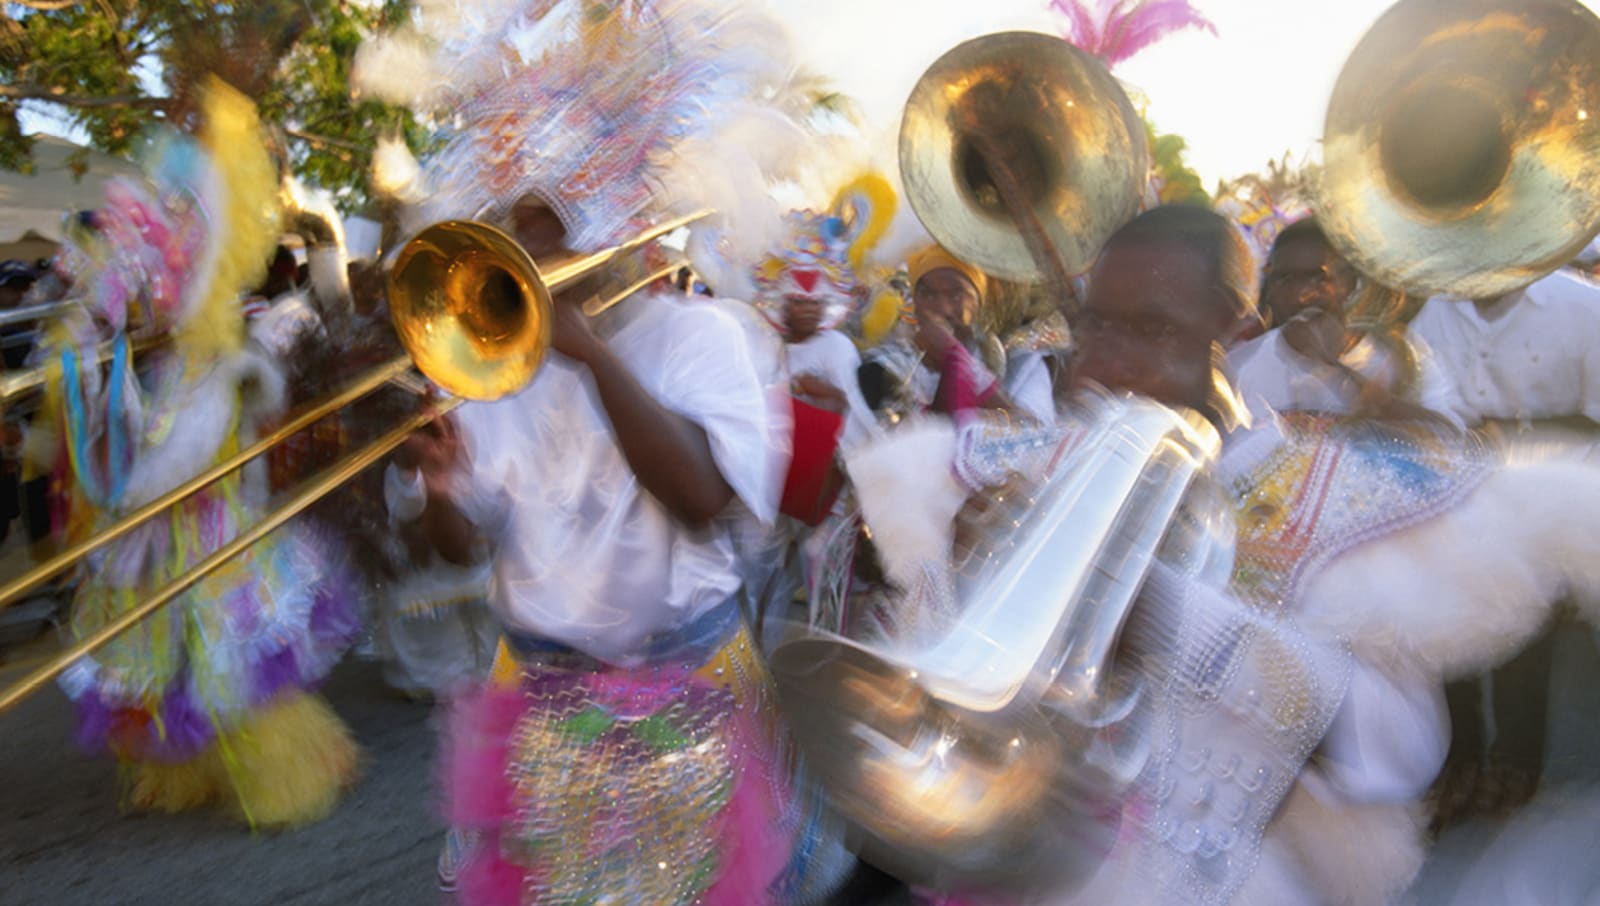 Junkanoo celebration with people playing brass instruments and celebrating